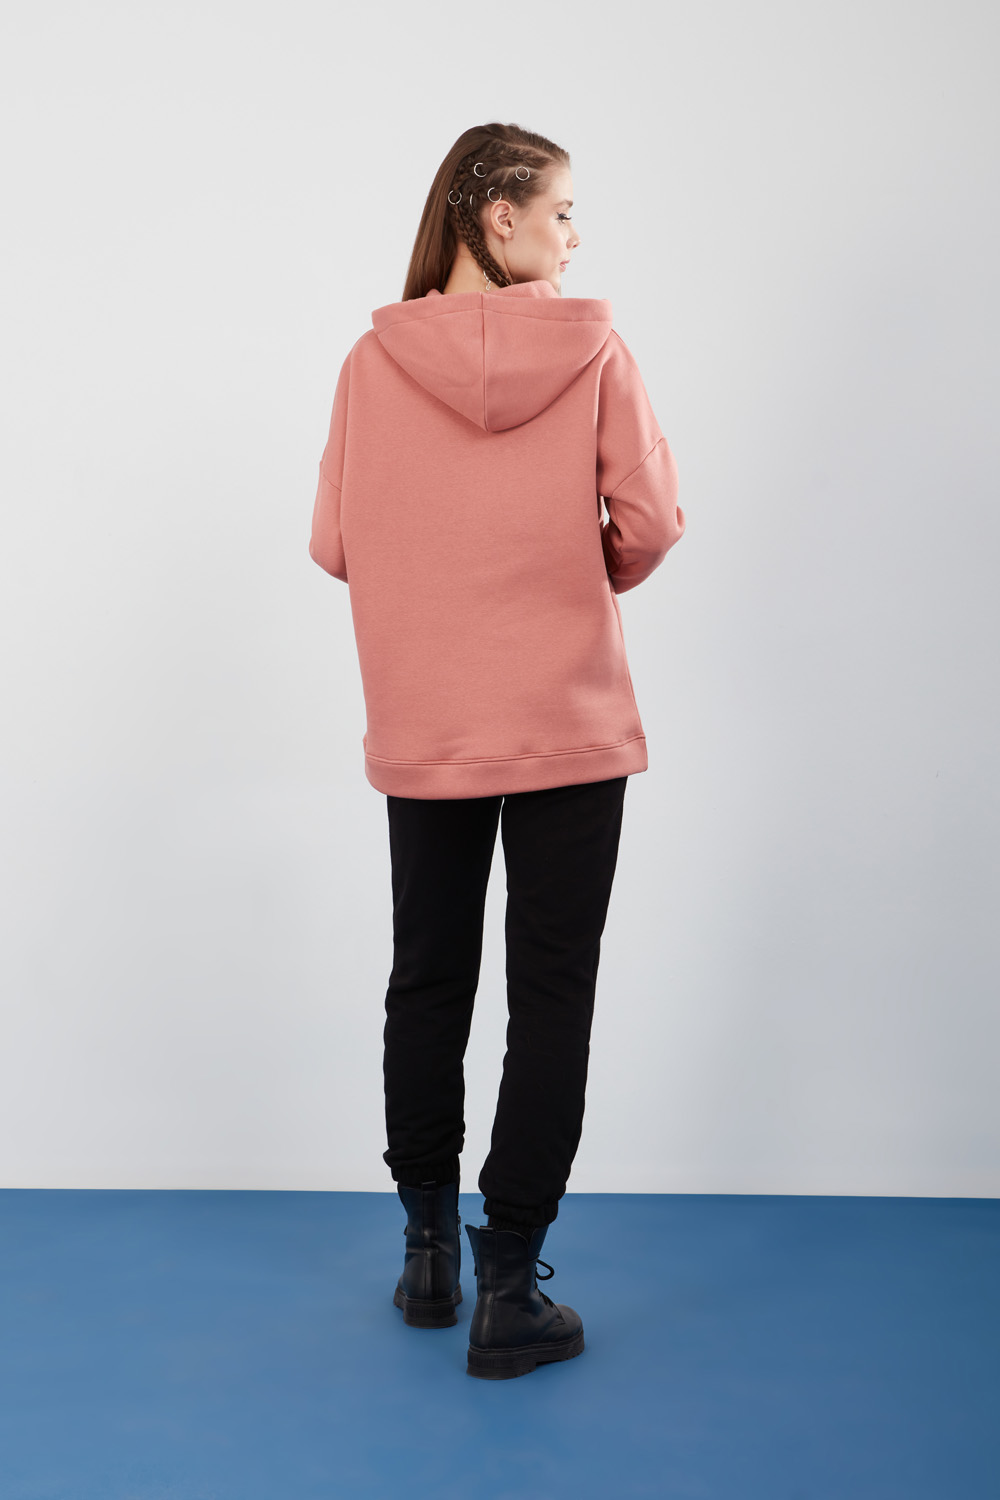 Rose Hooded Winter Sweatshirt with Pockets